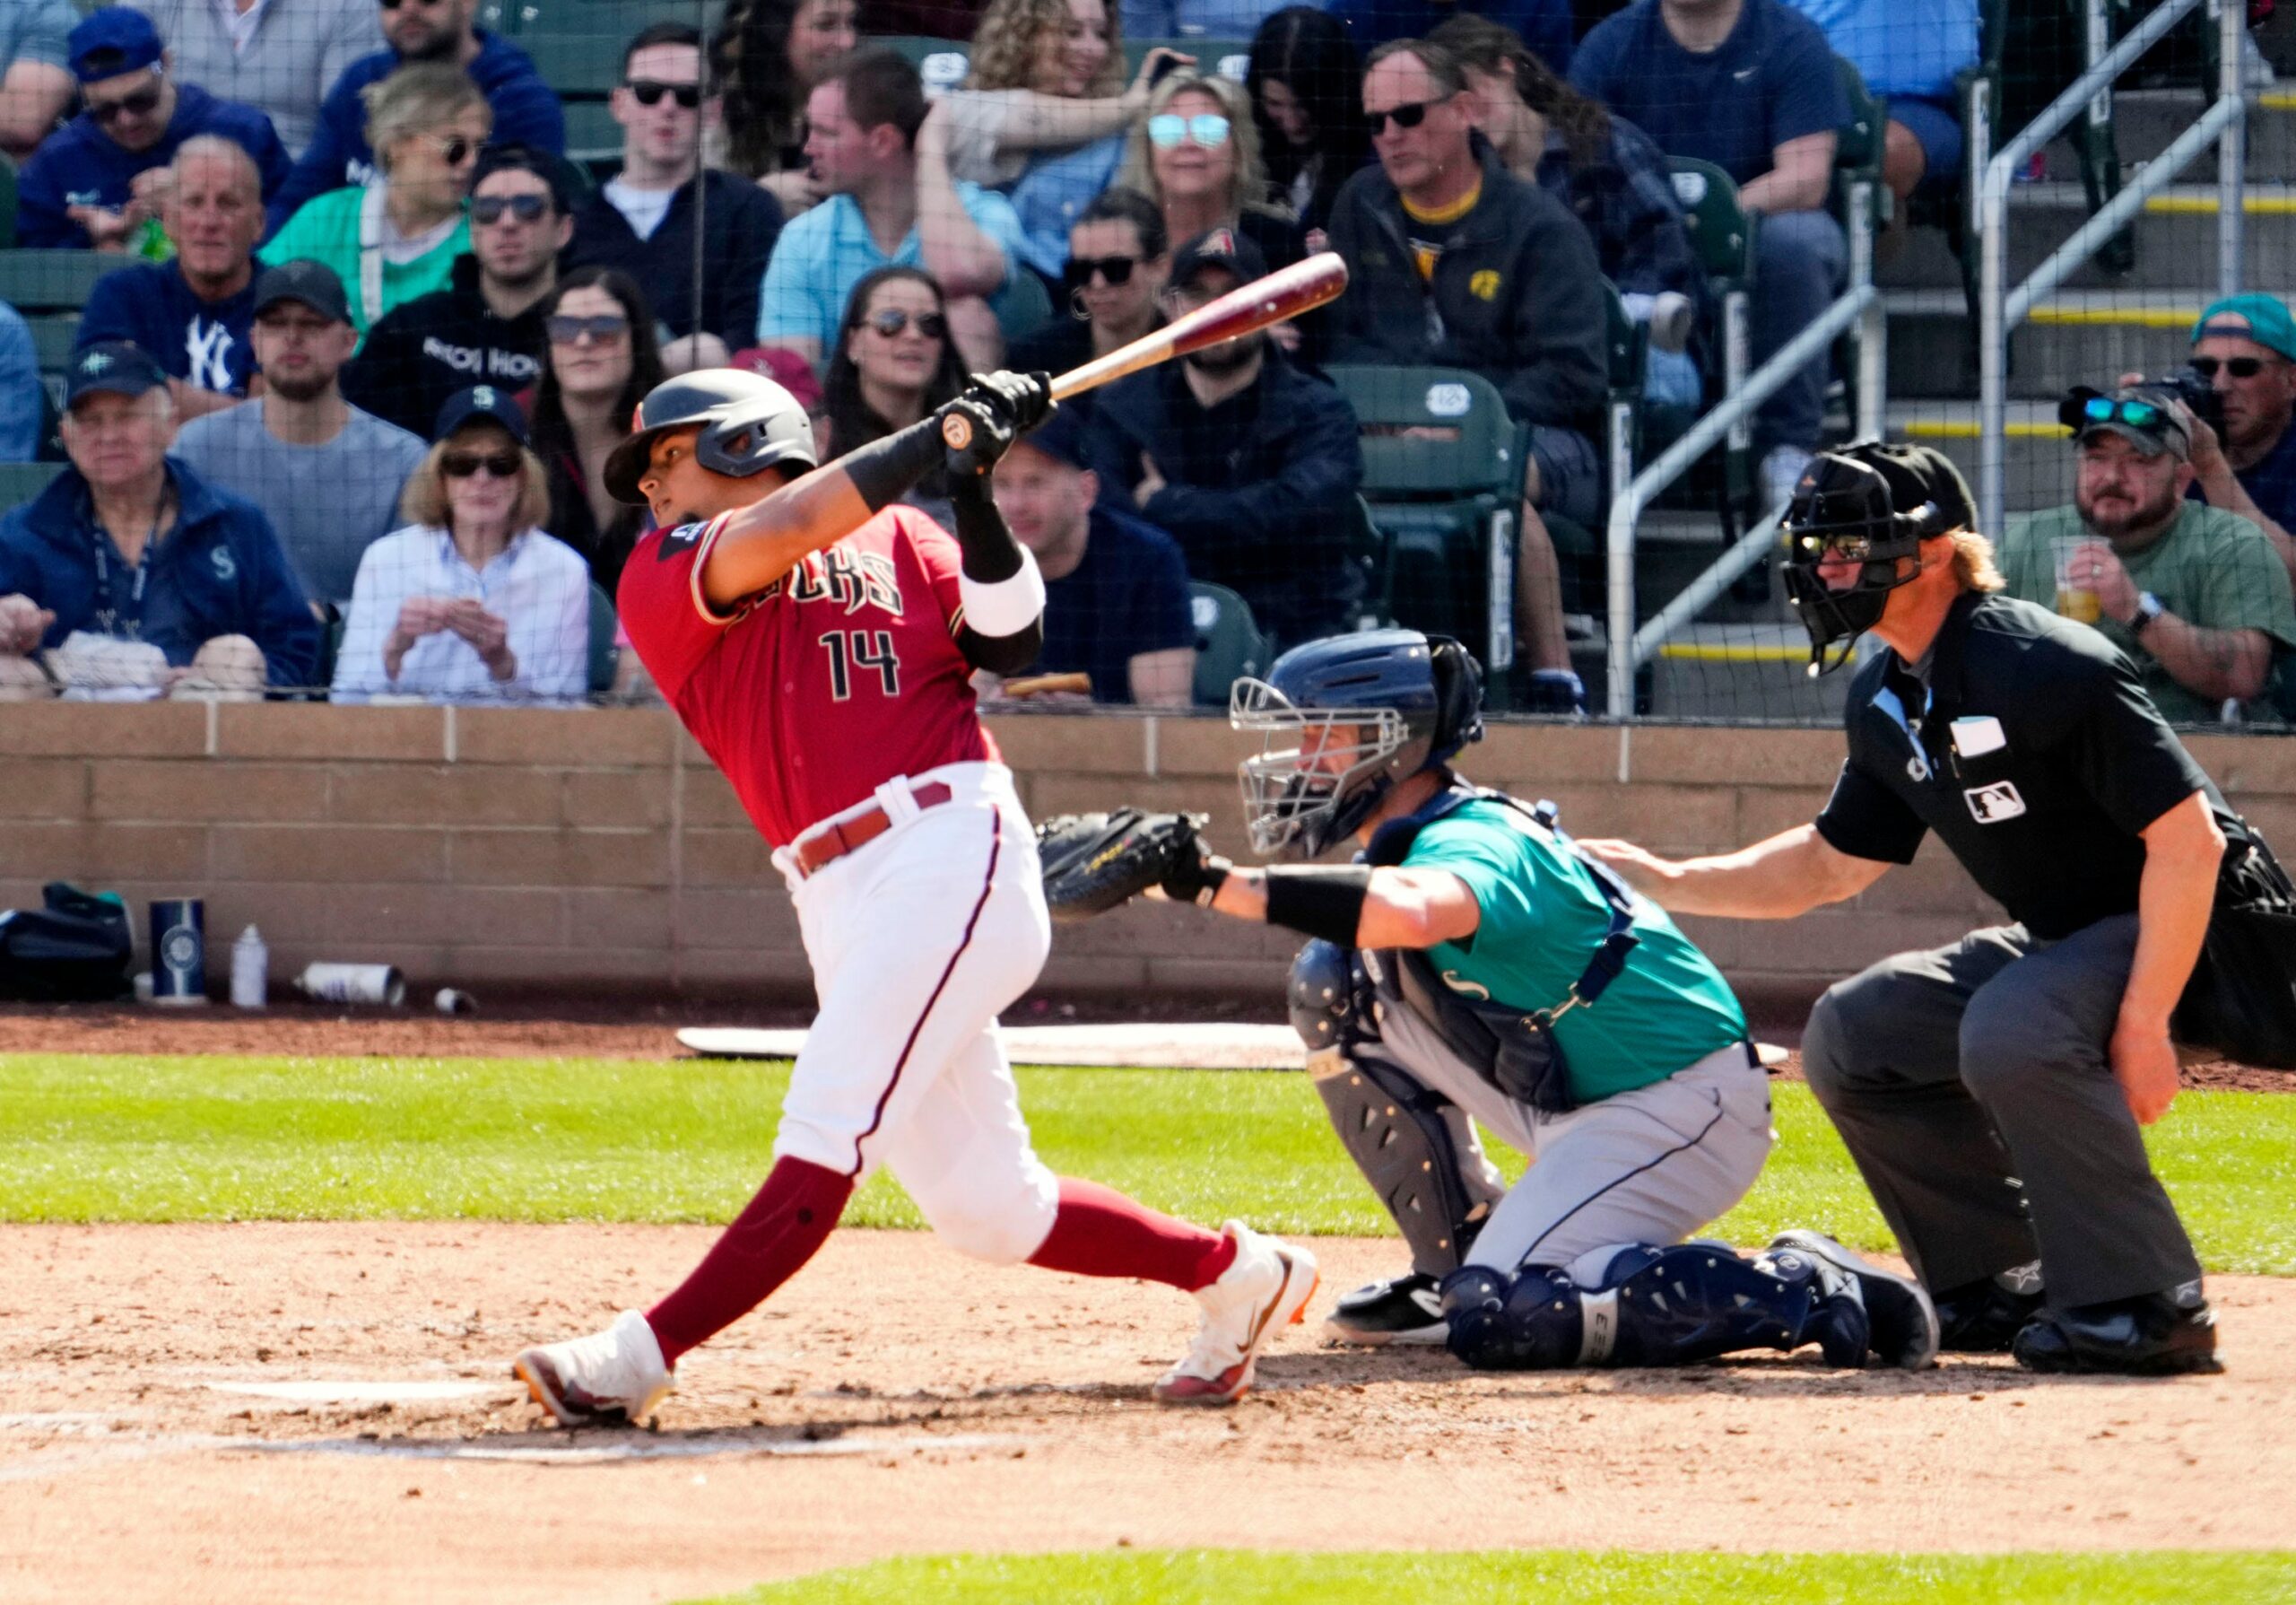 Diamondbacks catcher Gabriel Moreno hits a single against the Seattle Mariners during a spring training game at Salt River Fields.